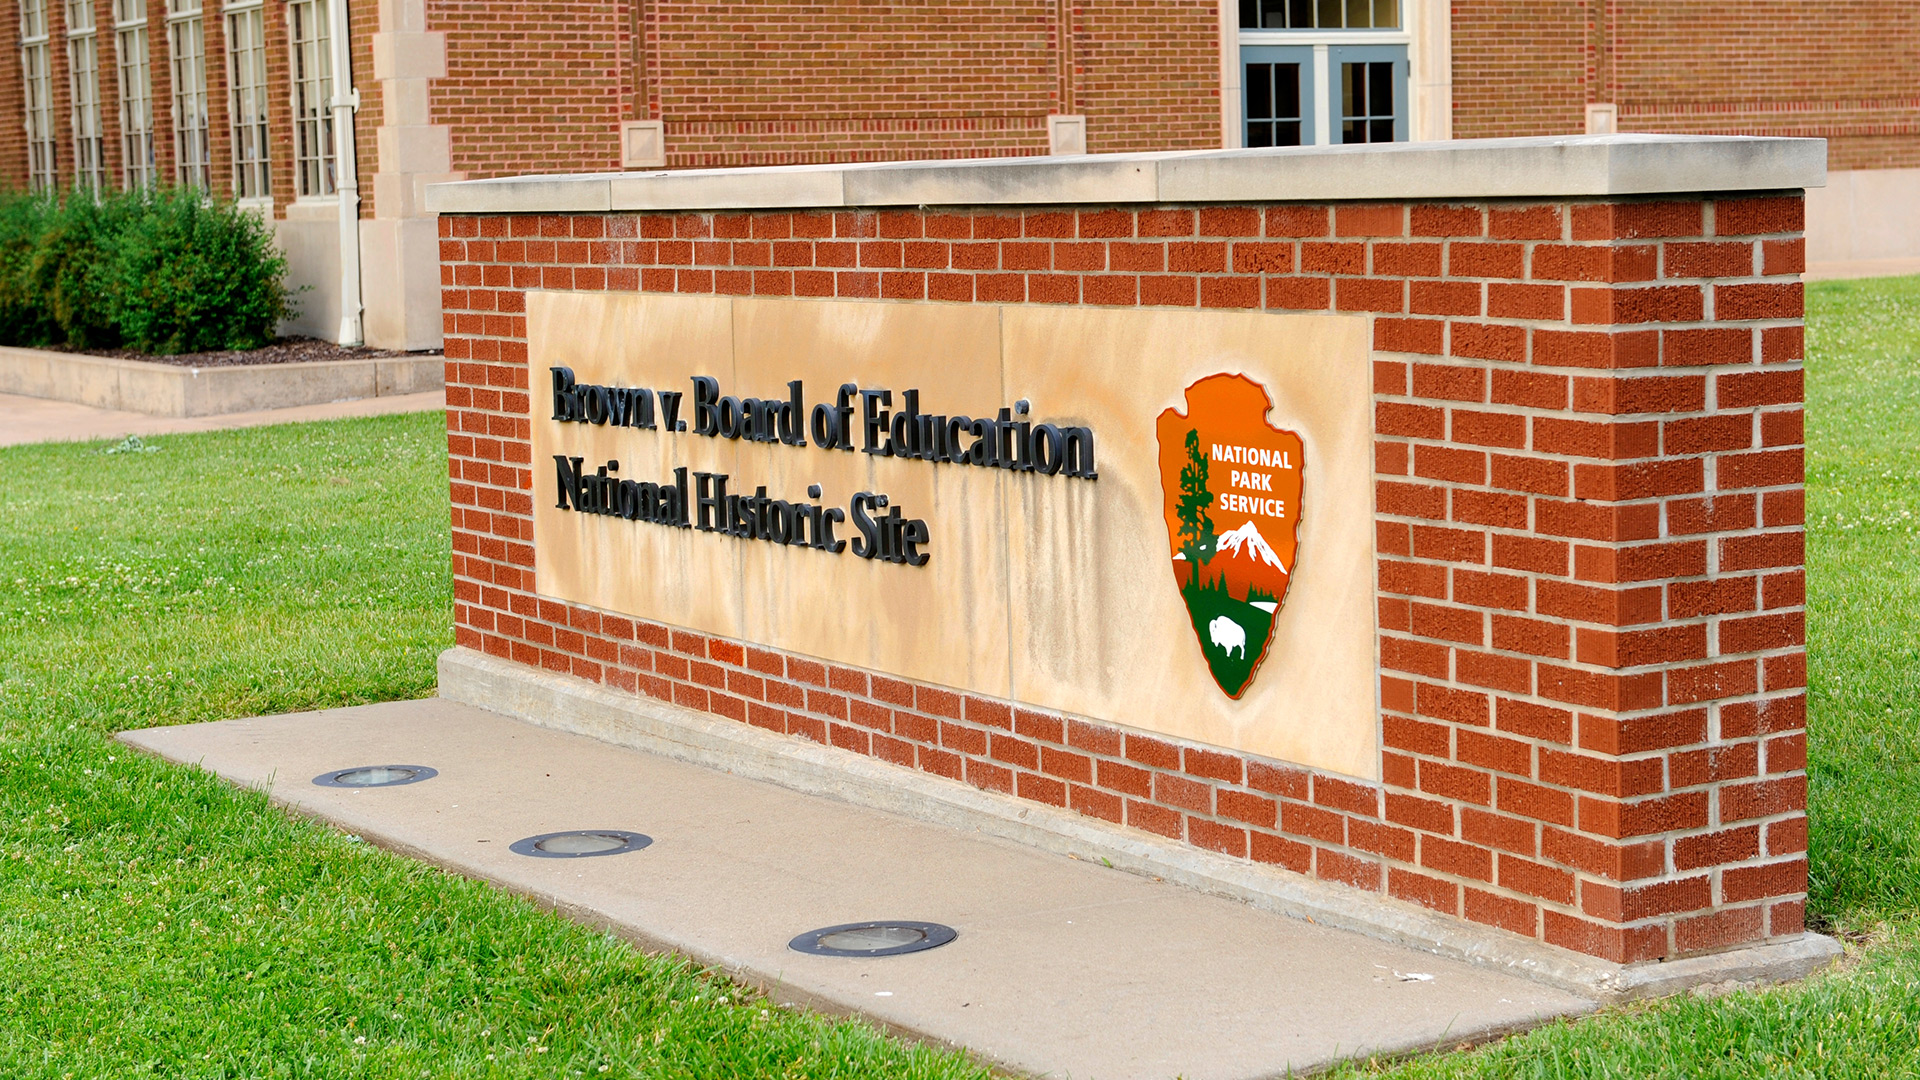 A National Historical Park commemorating Brown v. Board of Education sits in Topeka, Kansas.